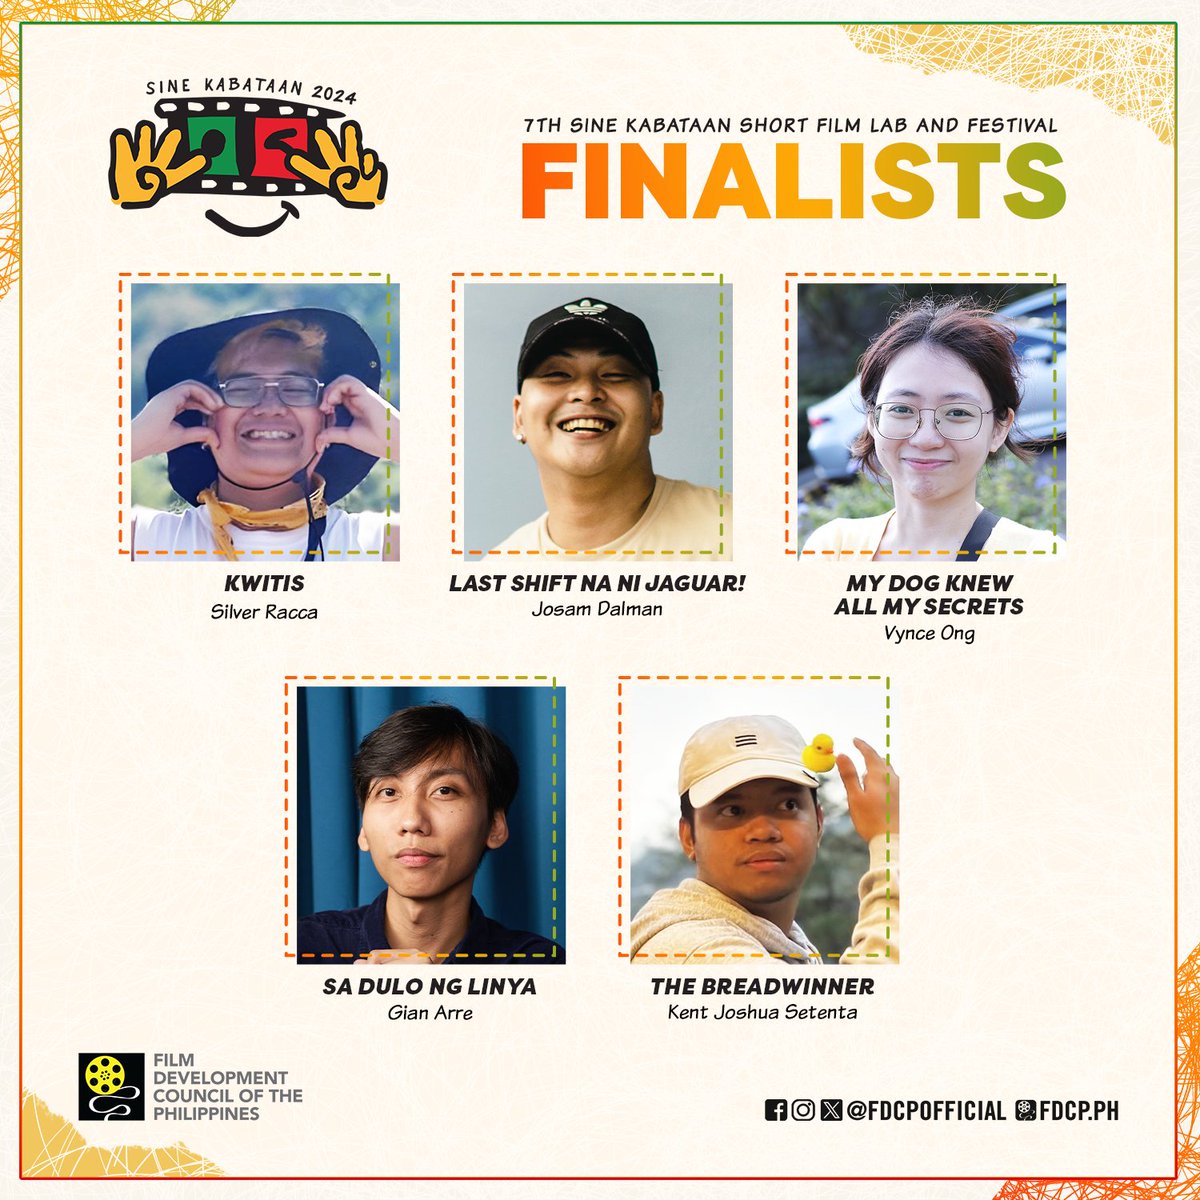 CONGRATULATIONS TO THE SINE KABATAAN FINALISTS! 🎊 The FDCP proudly announces the official finalists of the 7th Sine Kabataan Short Film Lab and Festival.

Thank you to all filmmakers who submitted their entries for Sine Kabataan!

#FDCP #SineKabataan